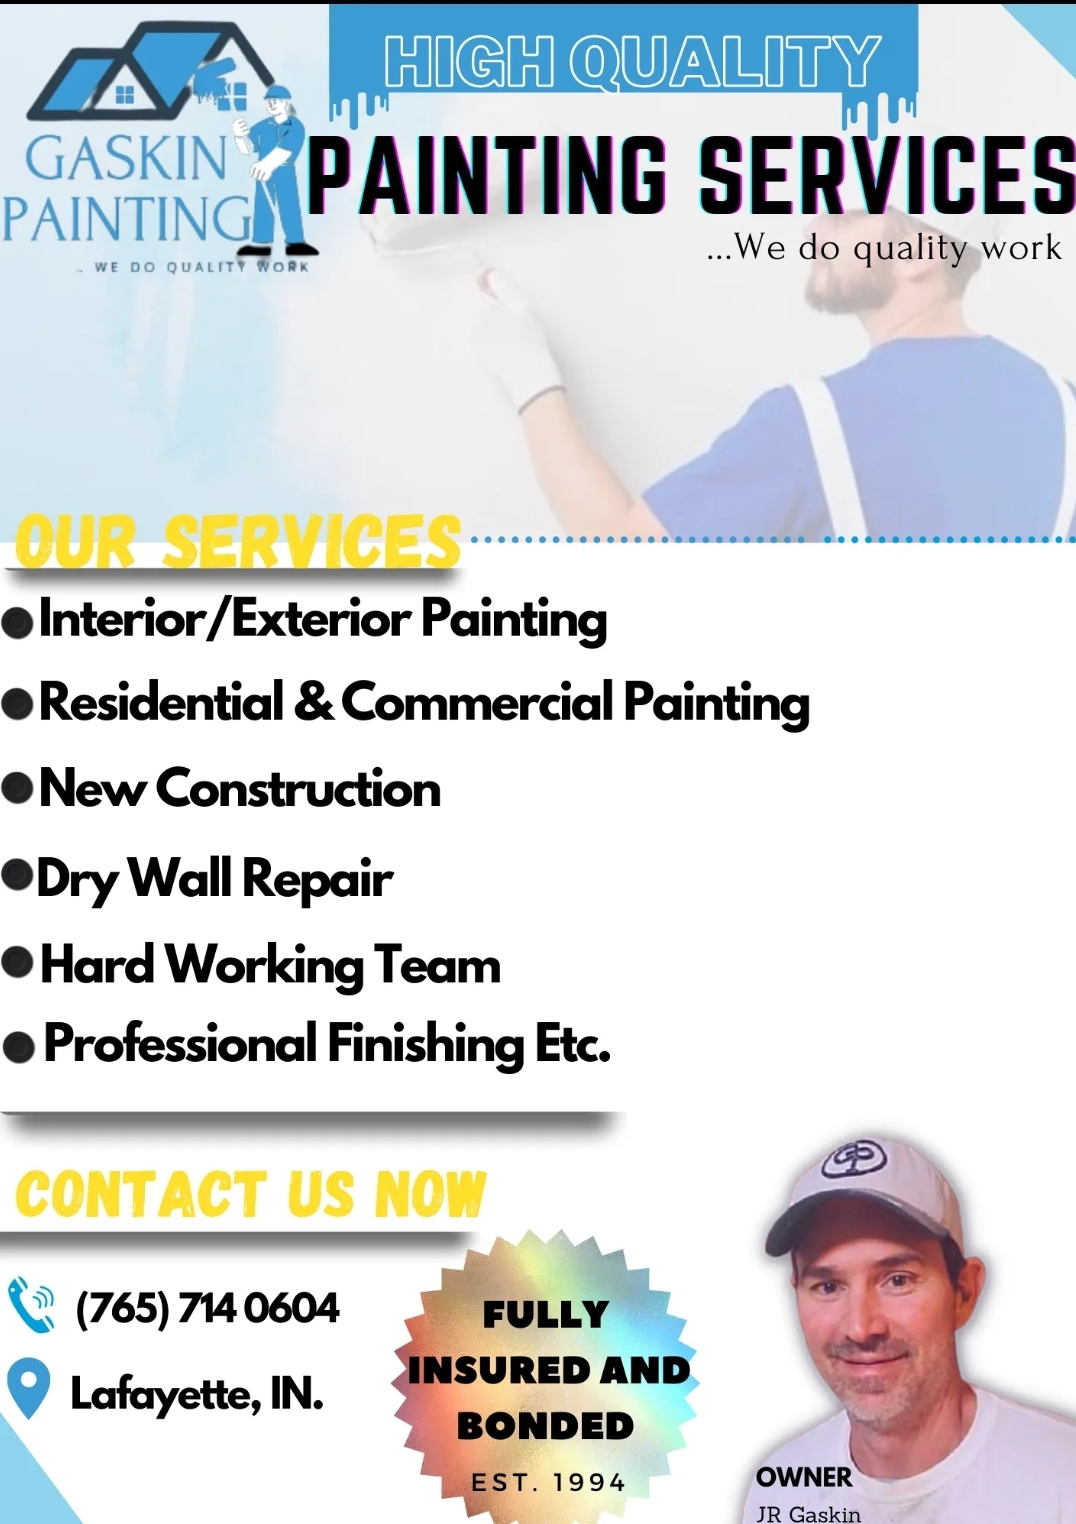 Gaskin Painting Services 307 Evergreen Blvd, Linden Indiana 47955